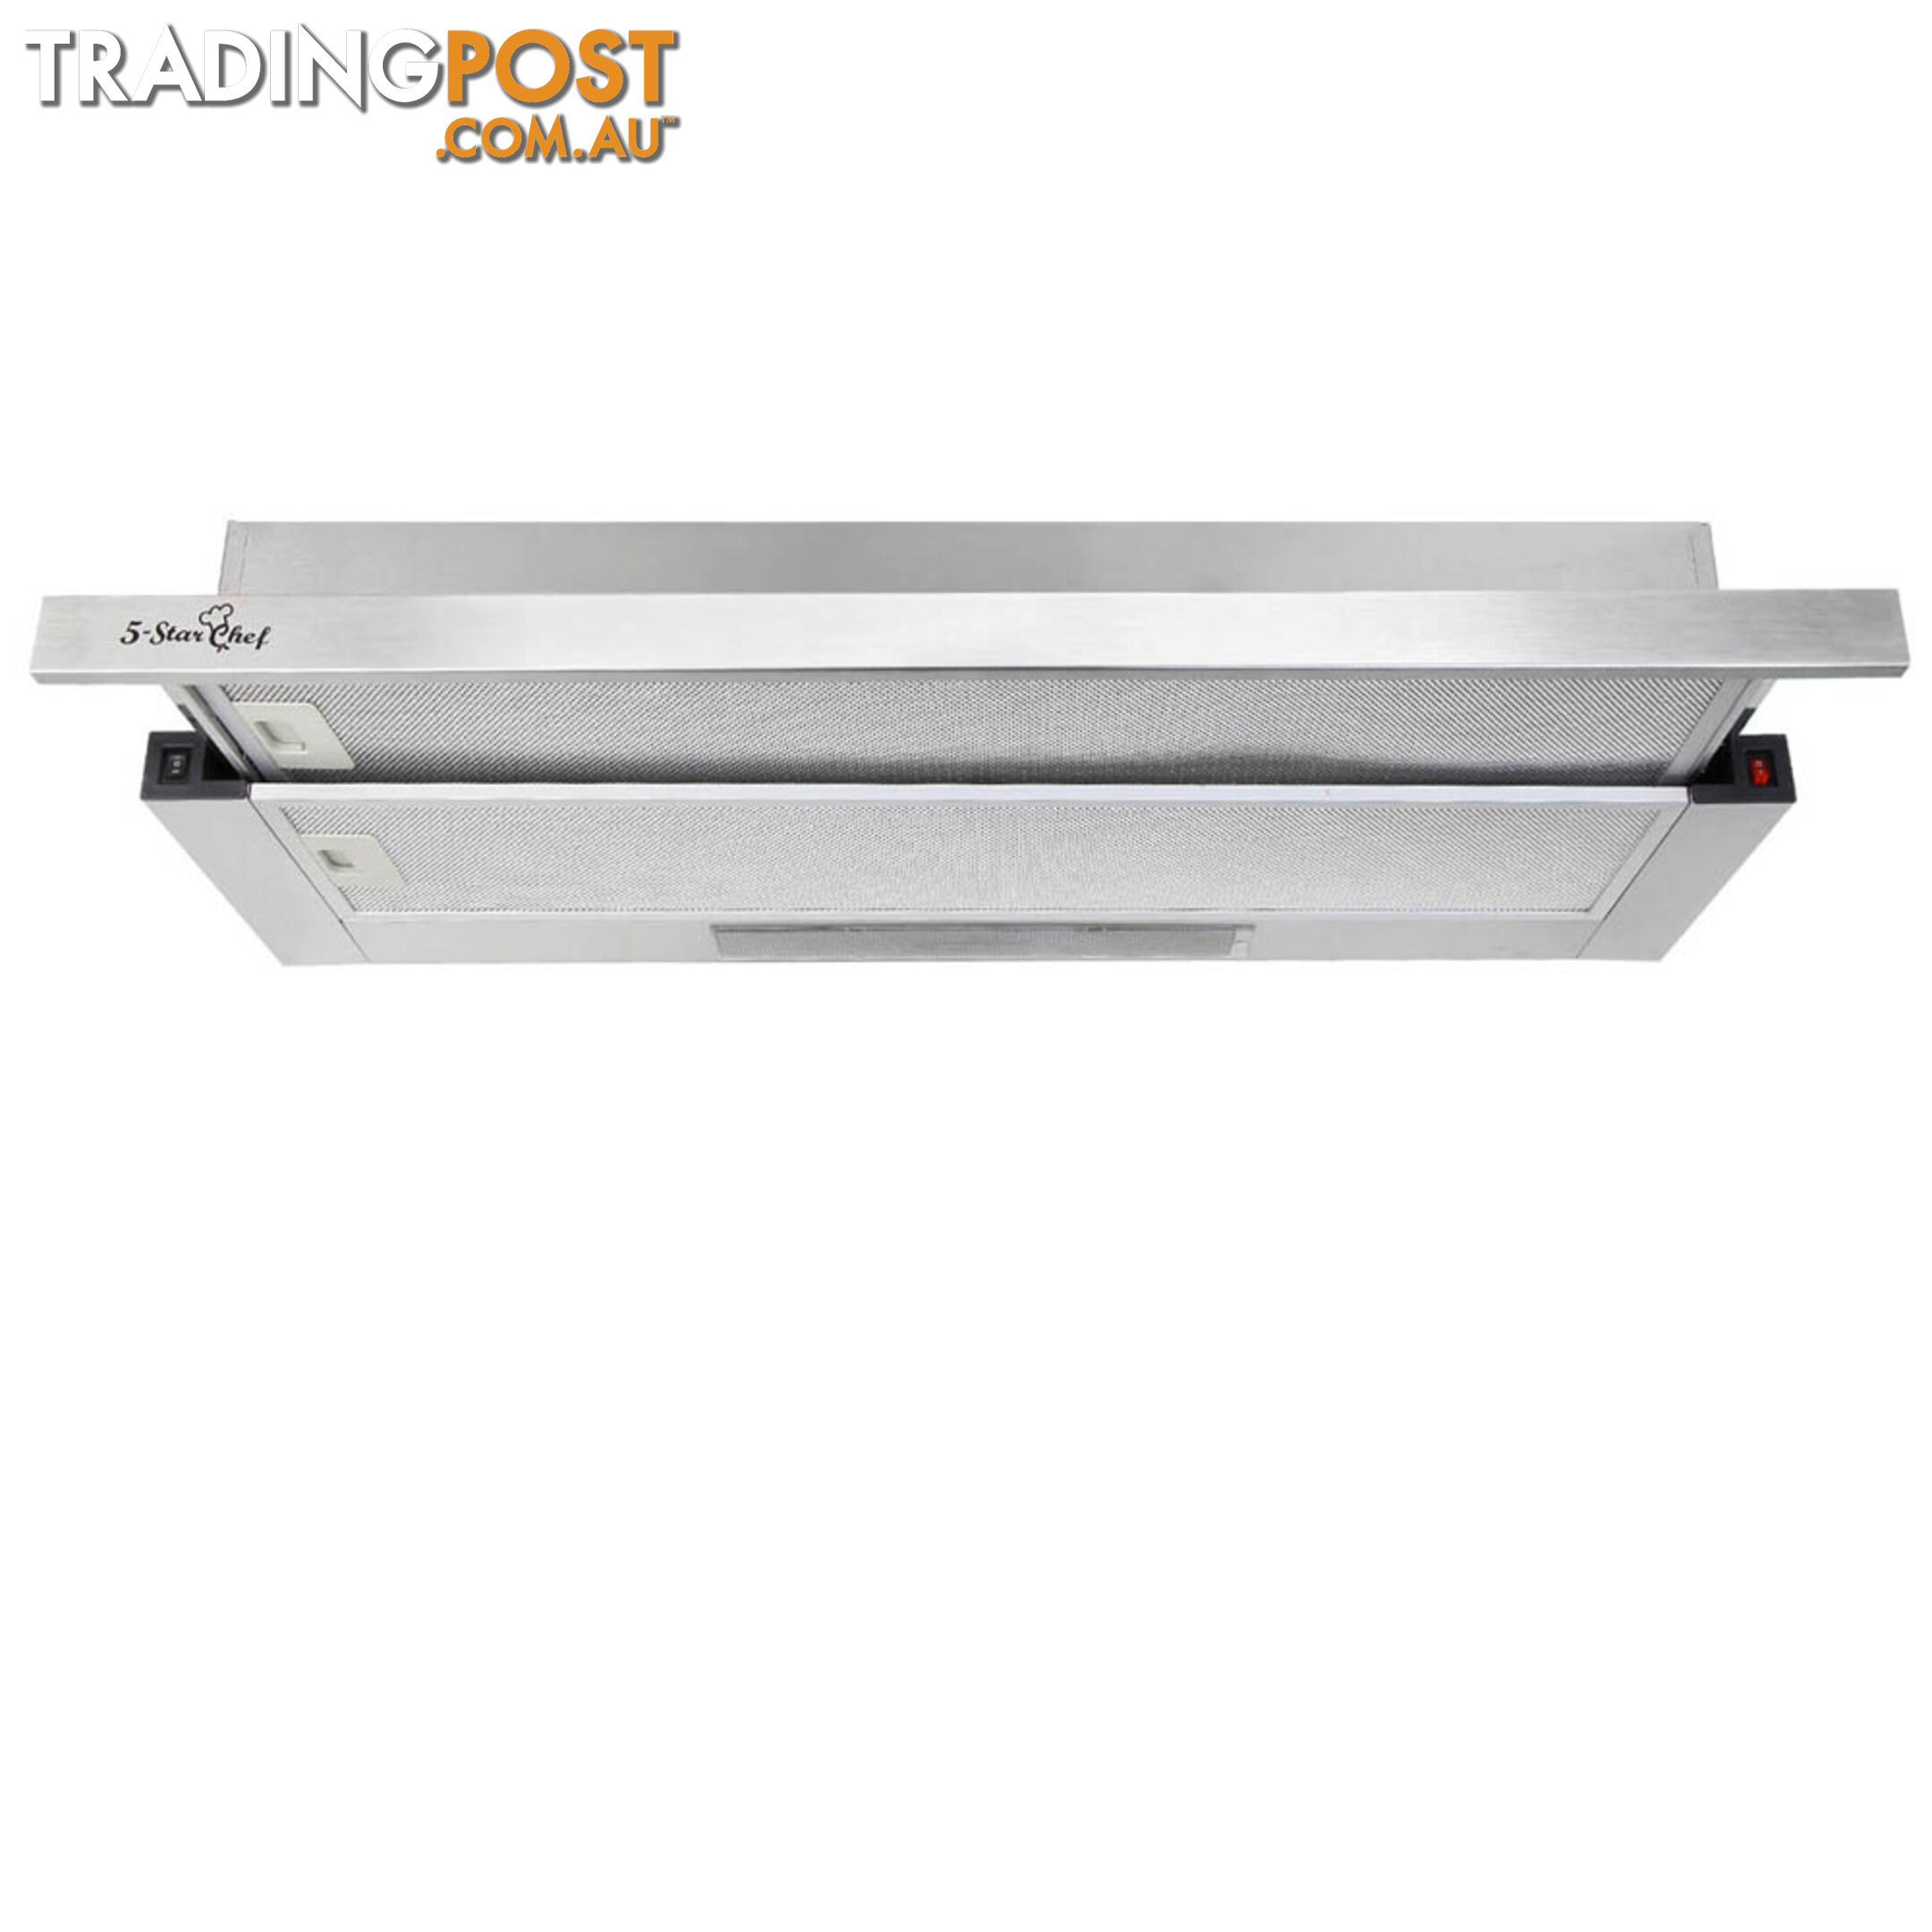 Stainless Slide Out Range Hood Kitchen Canopy Rangehood Exhaust Extractor 90cm